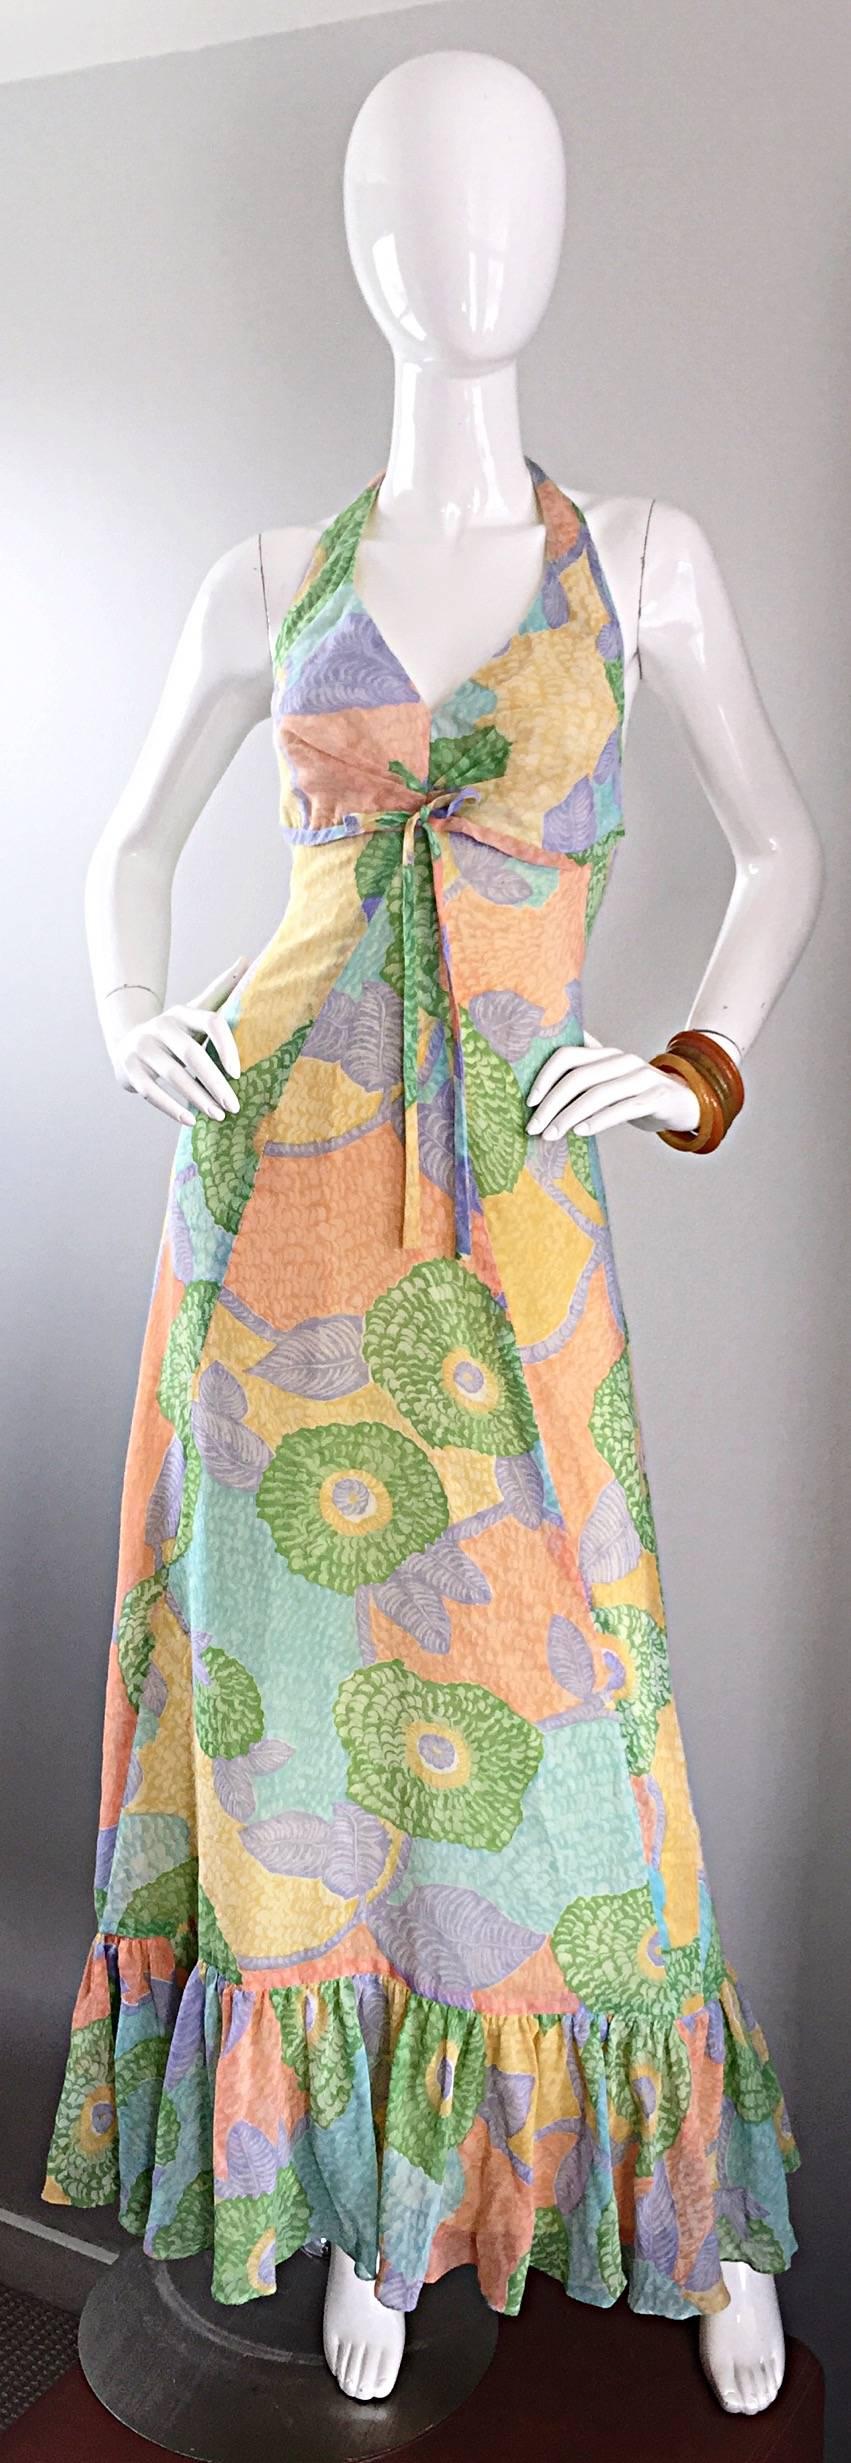 Fantastic 1970s vintage ELLIETTE LEWIS colorful flower printed halter maxi dress! Super soft cotton voile fabric. Everything about this beauty screams chic! Features an attached bow below the bust, and ruffle hem. Buttons at back halter, covered in